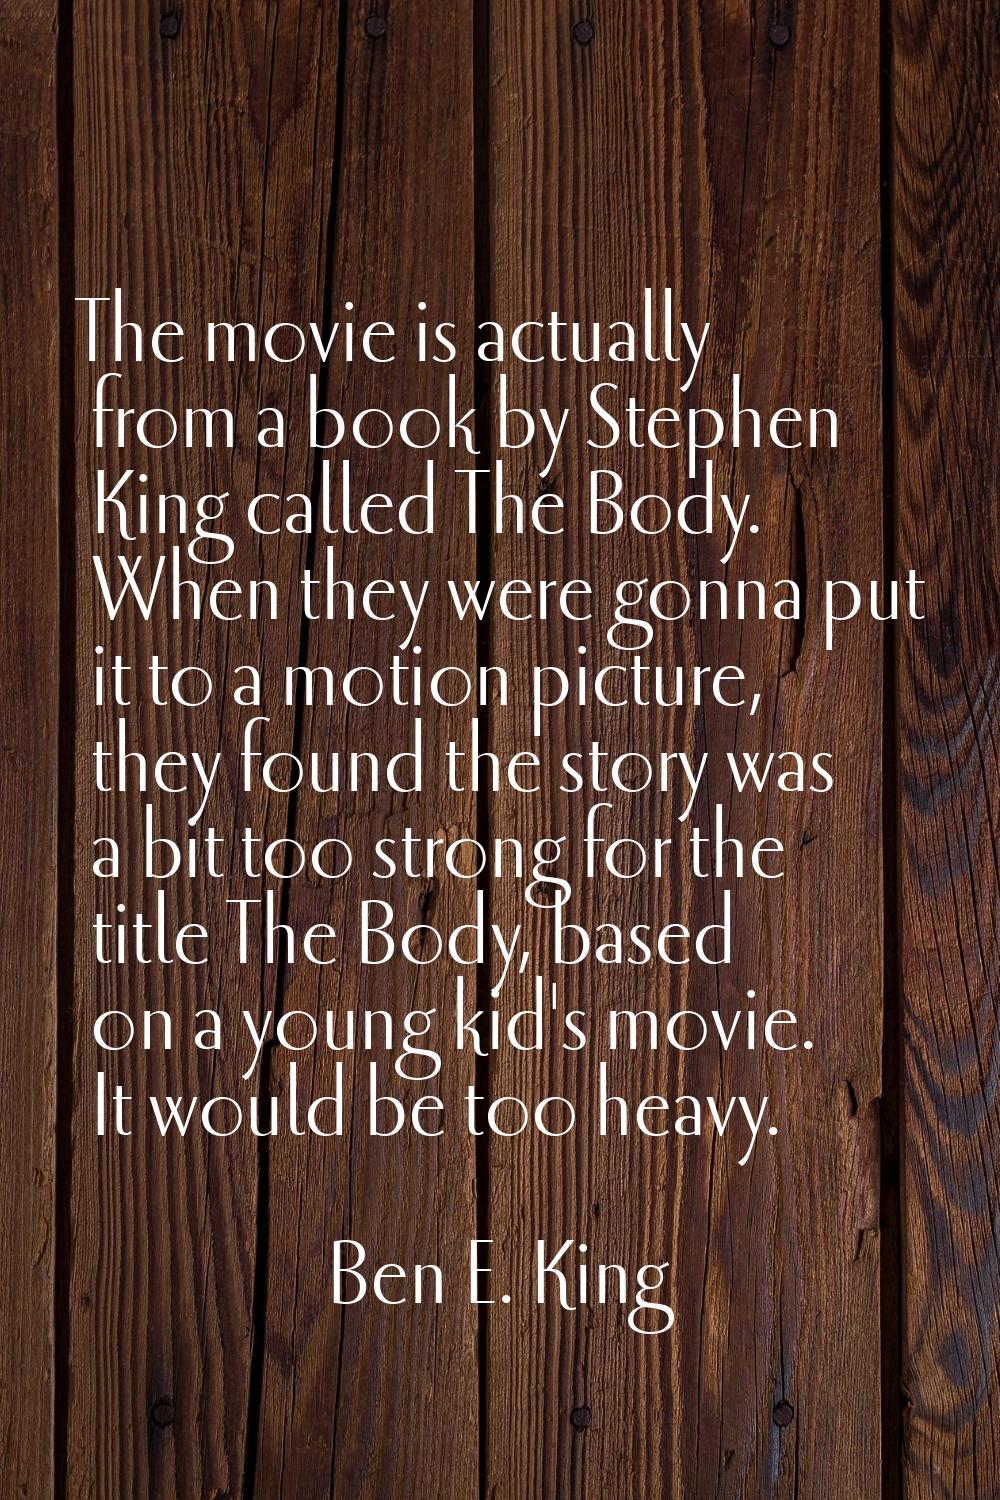 The movie is actually from a book by Stephen King called The Body. When they were gonna put it to a